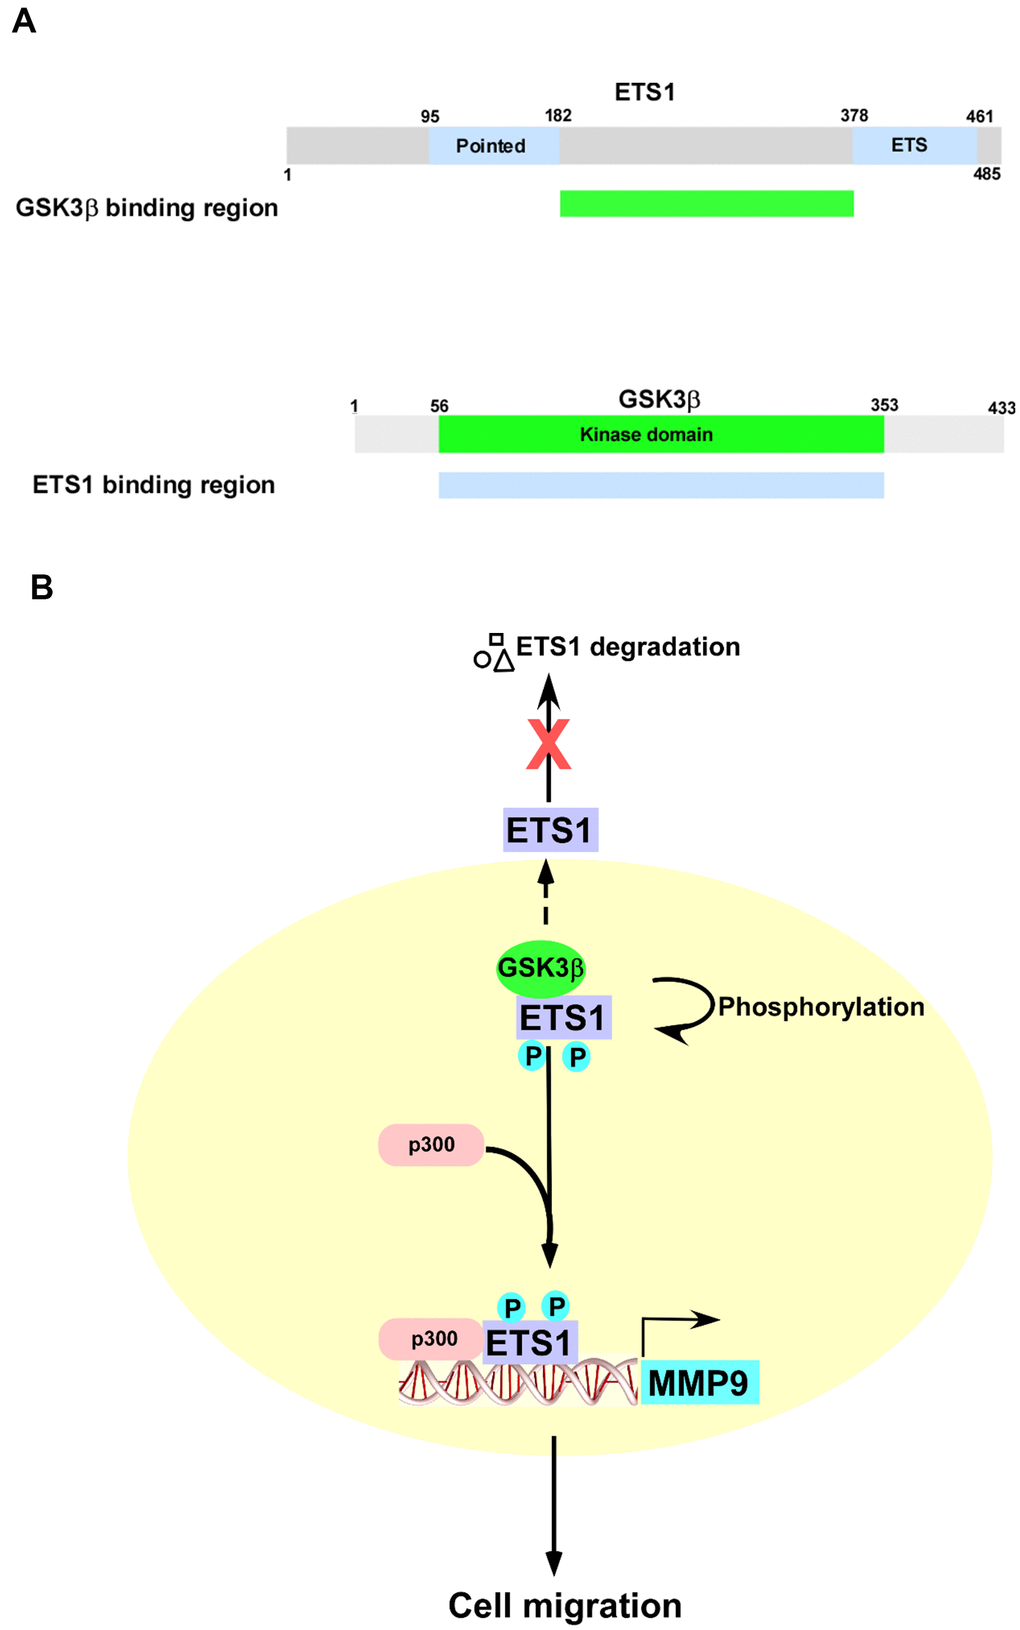 Schematic representation of the role played by the GSK3β/ETS1/MMP-9 axis in cell migration. (A) Summary of the interactions between different GSK3β and ETS1 domains. (B) Upon phosphorylation by GSK3β, ETS1 interacts with p300 to activate the MMP-9 promoter. Inhibition of GSK3β activity results in ETS1 degradation.